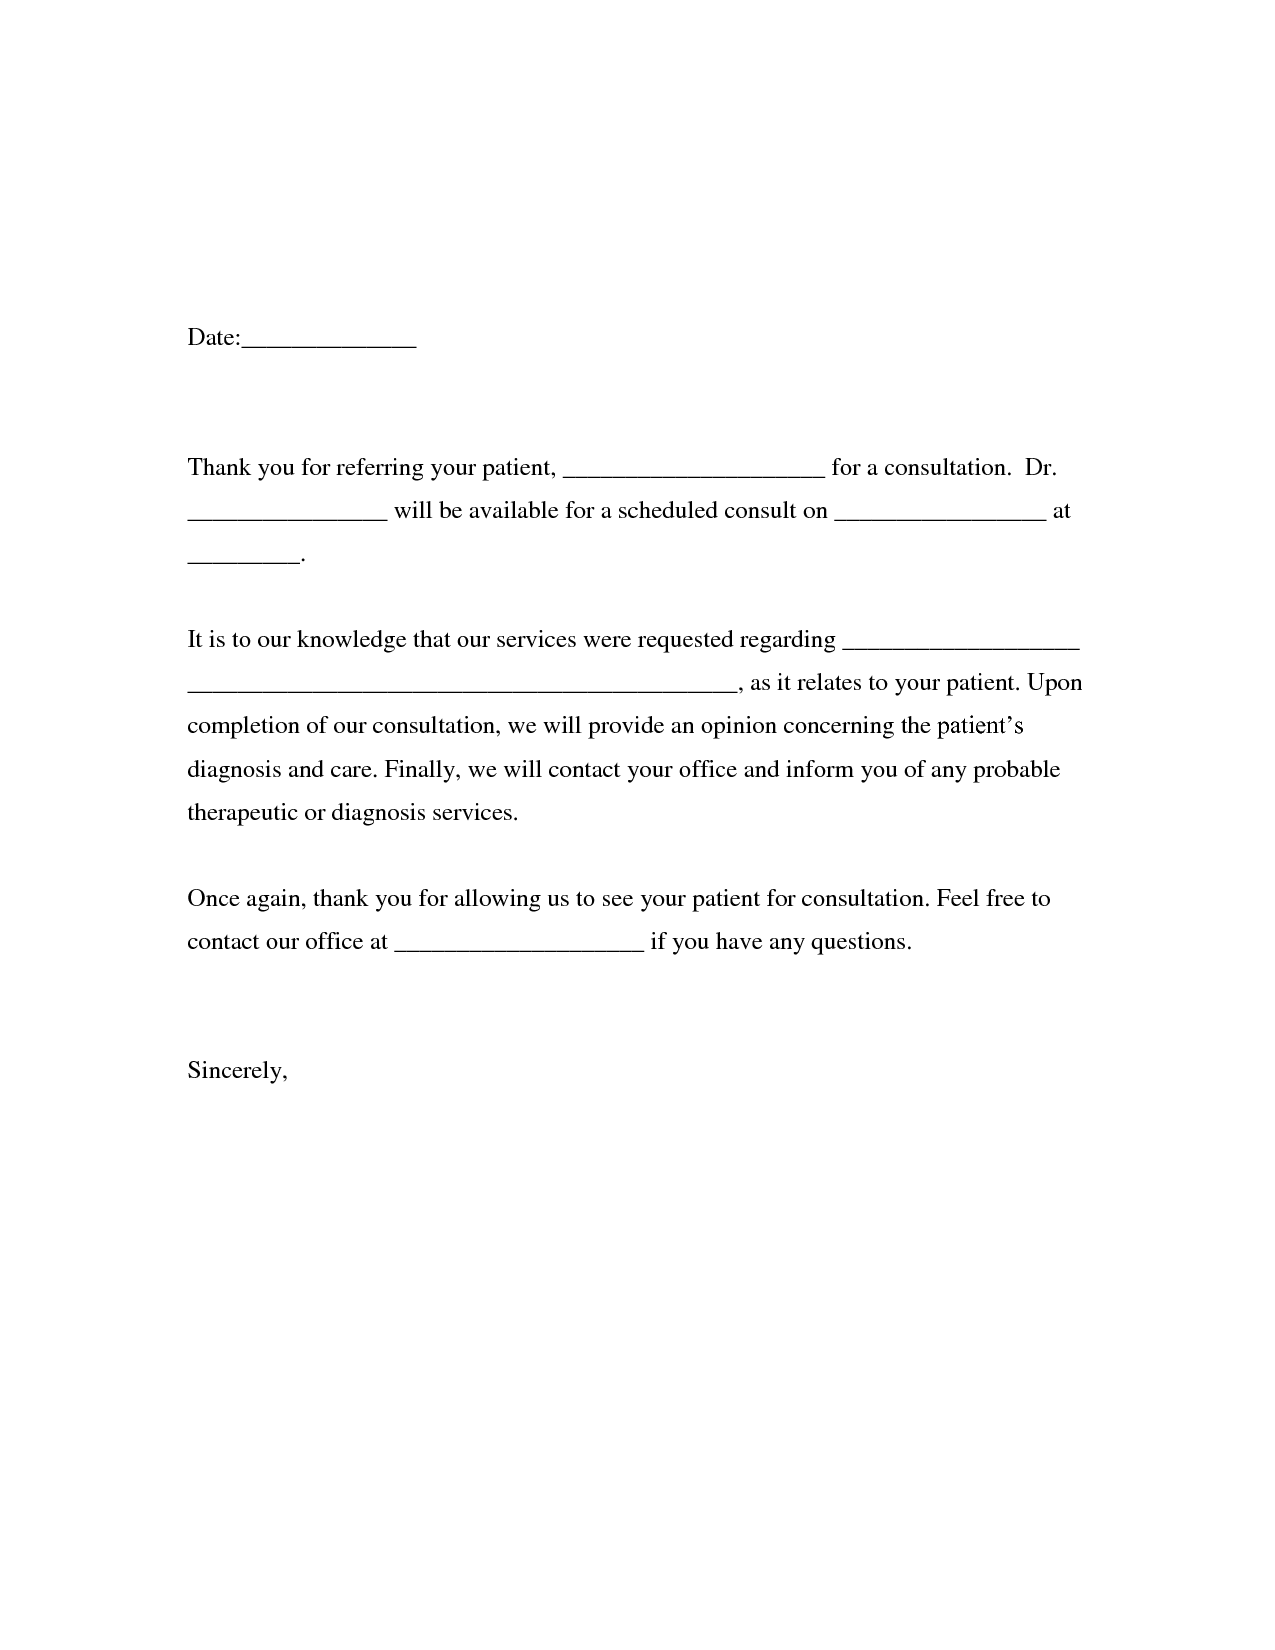 Thank You Letter For Patient Referral Images Letter Format 